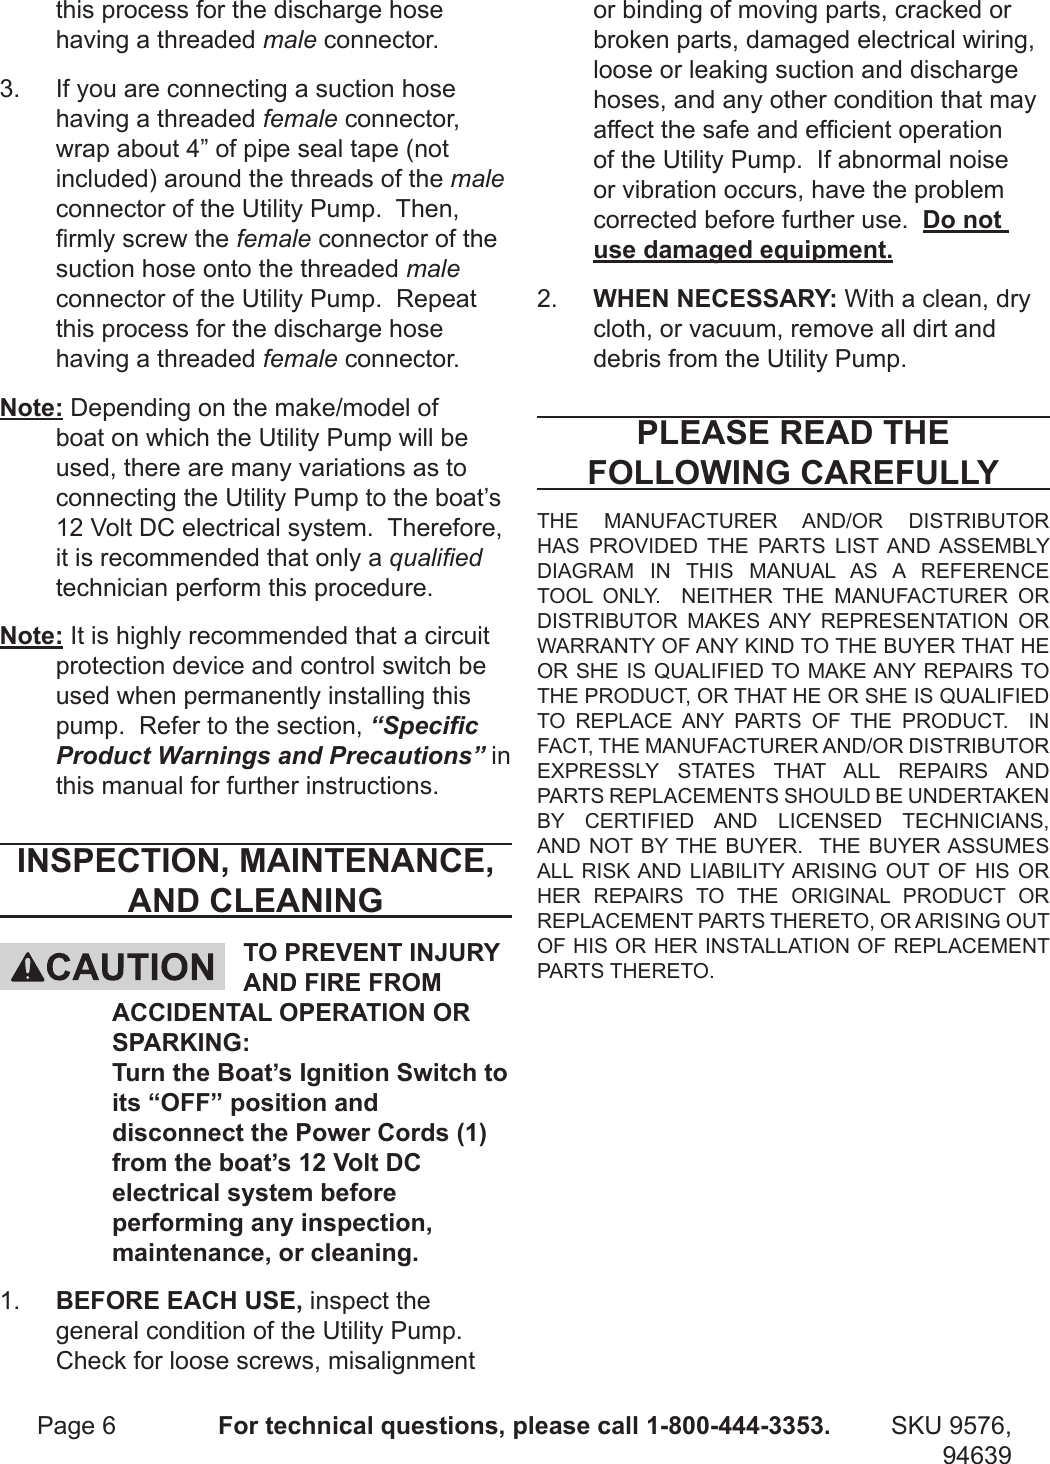 Page 6 of 8 - Harbor-Freight Harbor-Freight-12-Volt-Marine-Utility-Pump-Product-Manual-  Harbor-freight-12-volt-marine-utility-pump-product-manual